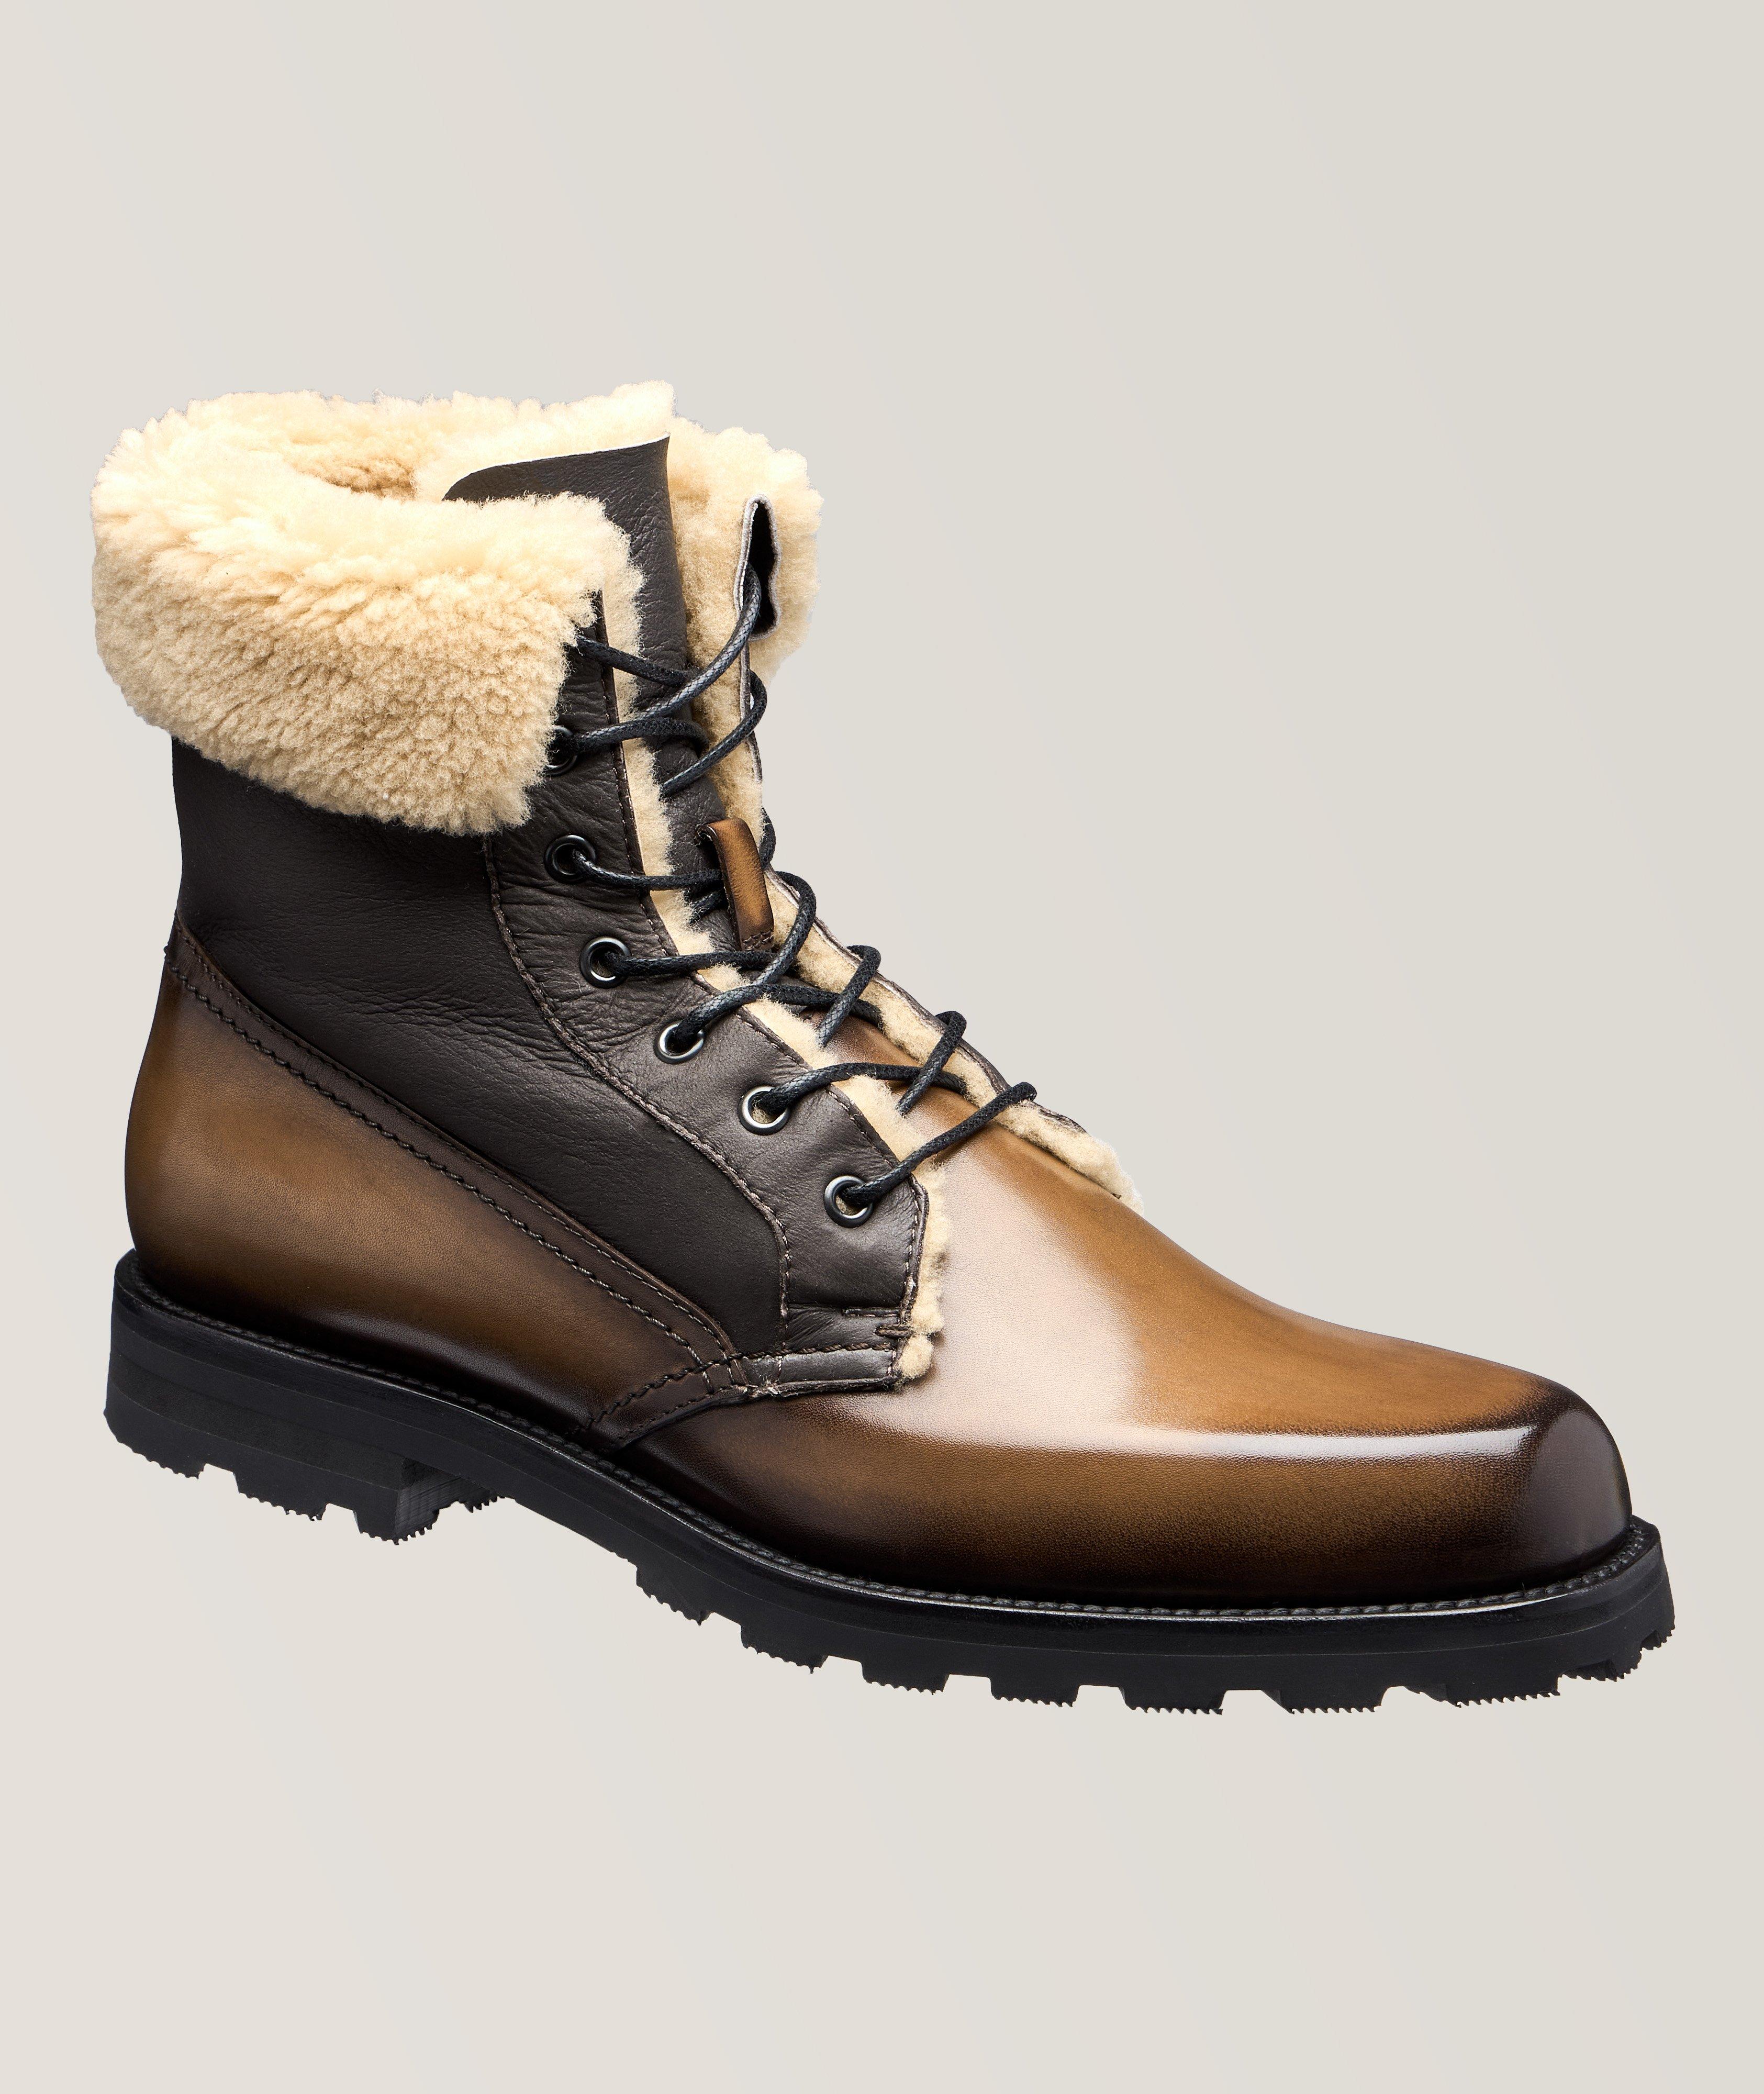 Ultima Shearling & Leather Boots image 0